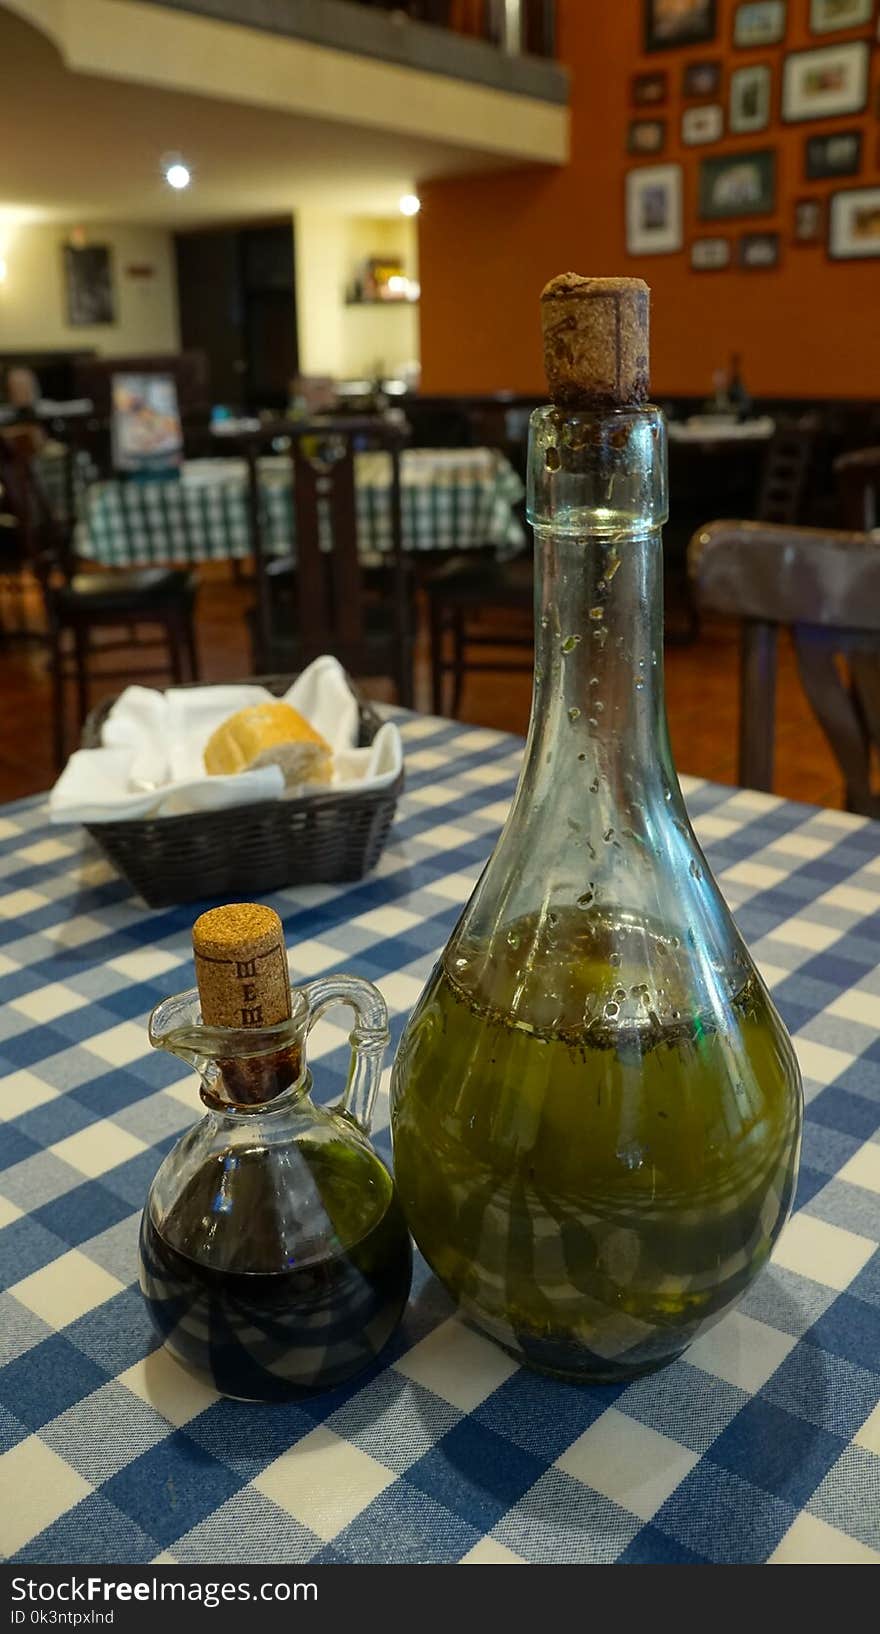 A italian restaurant traditional scene with some old glass bottles in the middle of the table containing oil to be added to the food, bread basket in the back. A italian restaurant traditional scene with some old glass bottles in the middle of the table containing oil to be added to the food, bread basket in the back